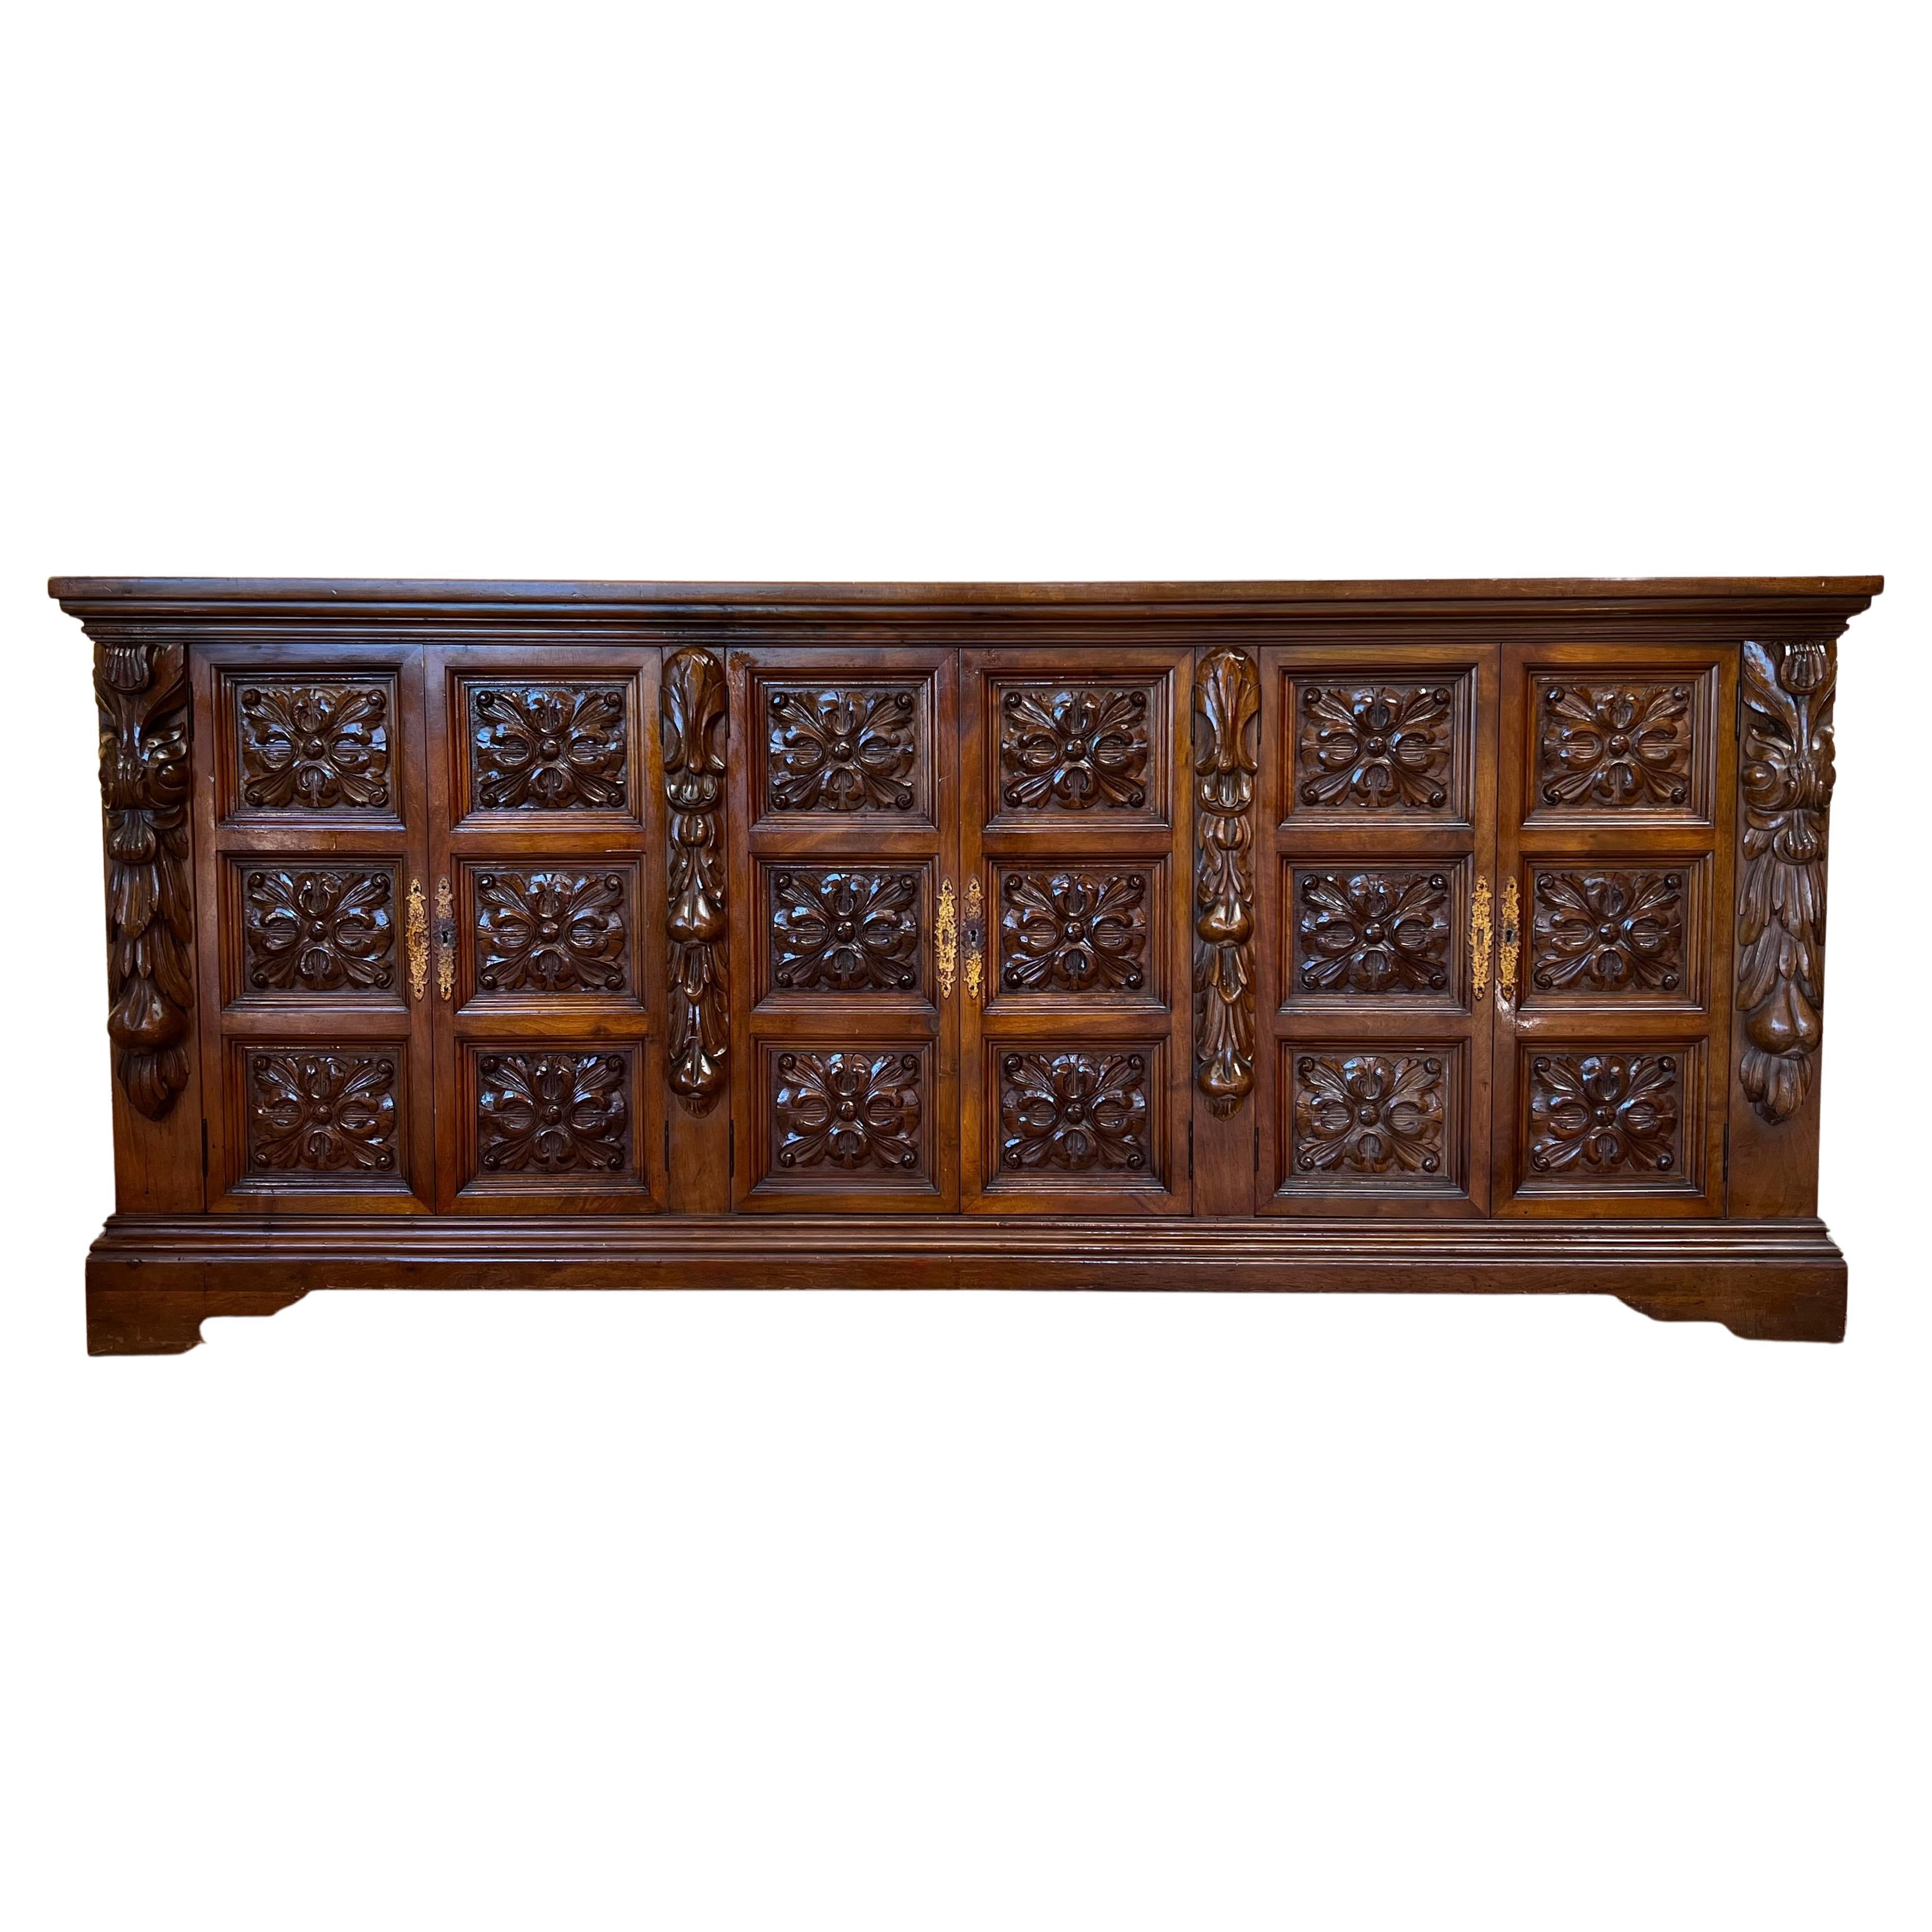 Antique Spanish Carved Walnut Sideboard with Florals Reliefs, circa 1870-1880